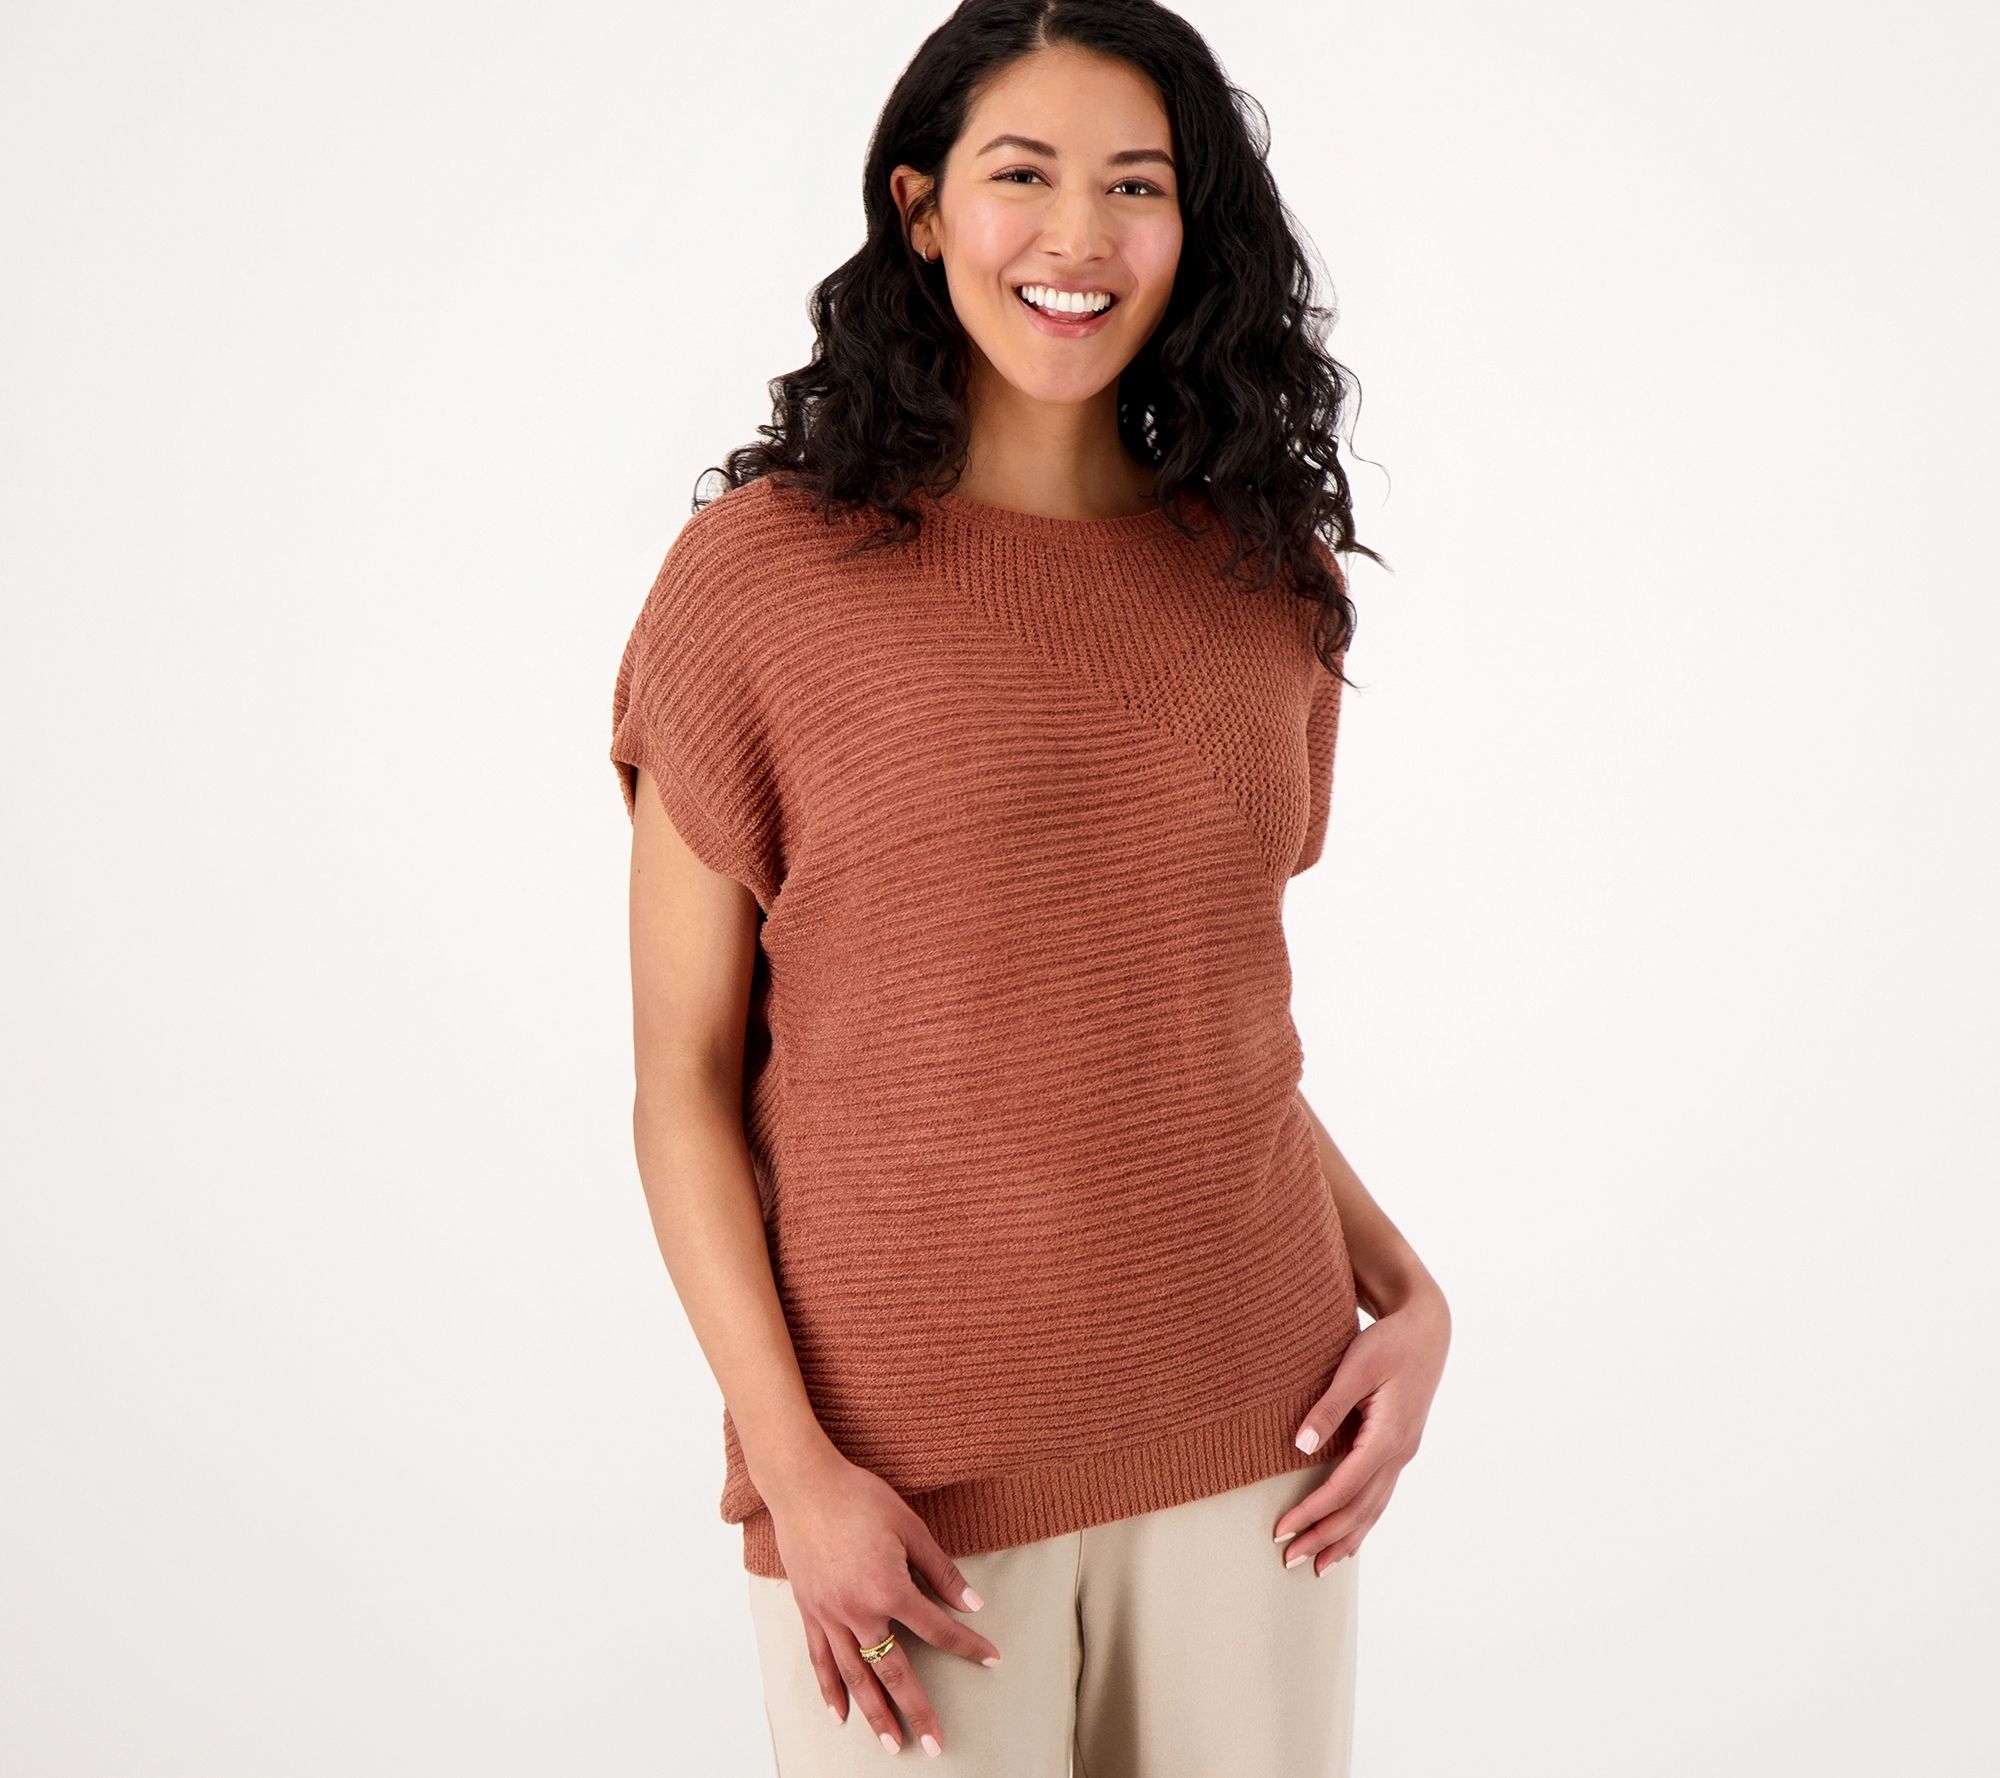 Clothing & Shoes - Tops - Sweaters & Cardigans - Pullovers - NYDJ Dolman  Sleeve Boat Neck Sweater - Online Shopping for Canadians